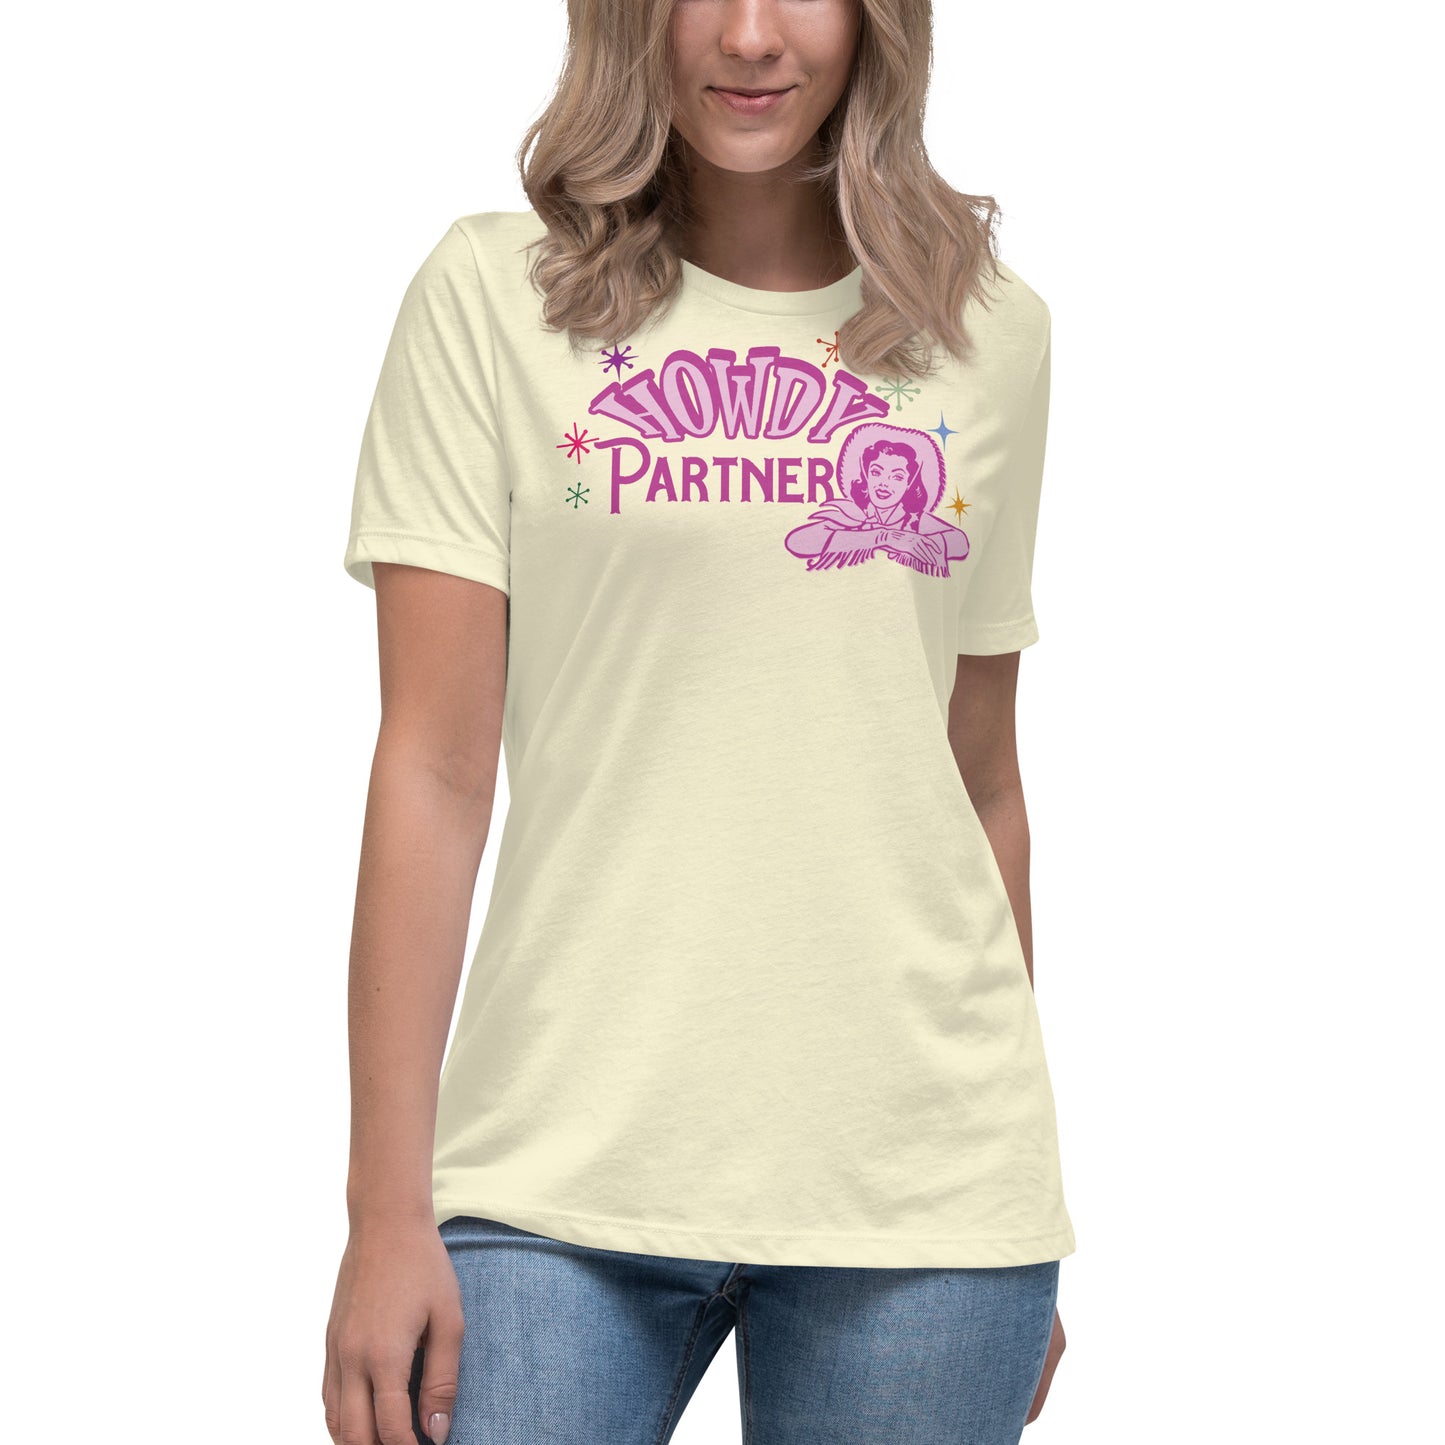 Howdy Partner Retro Cowgirl Women's Relaxed T-Shirt